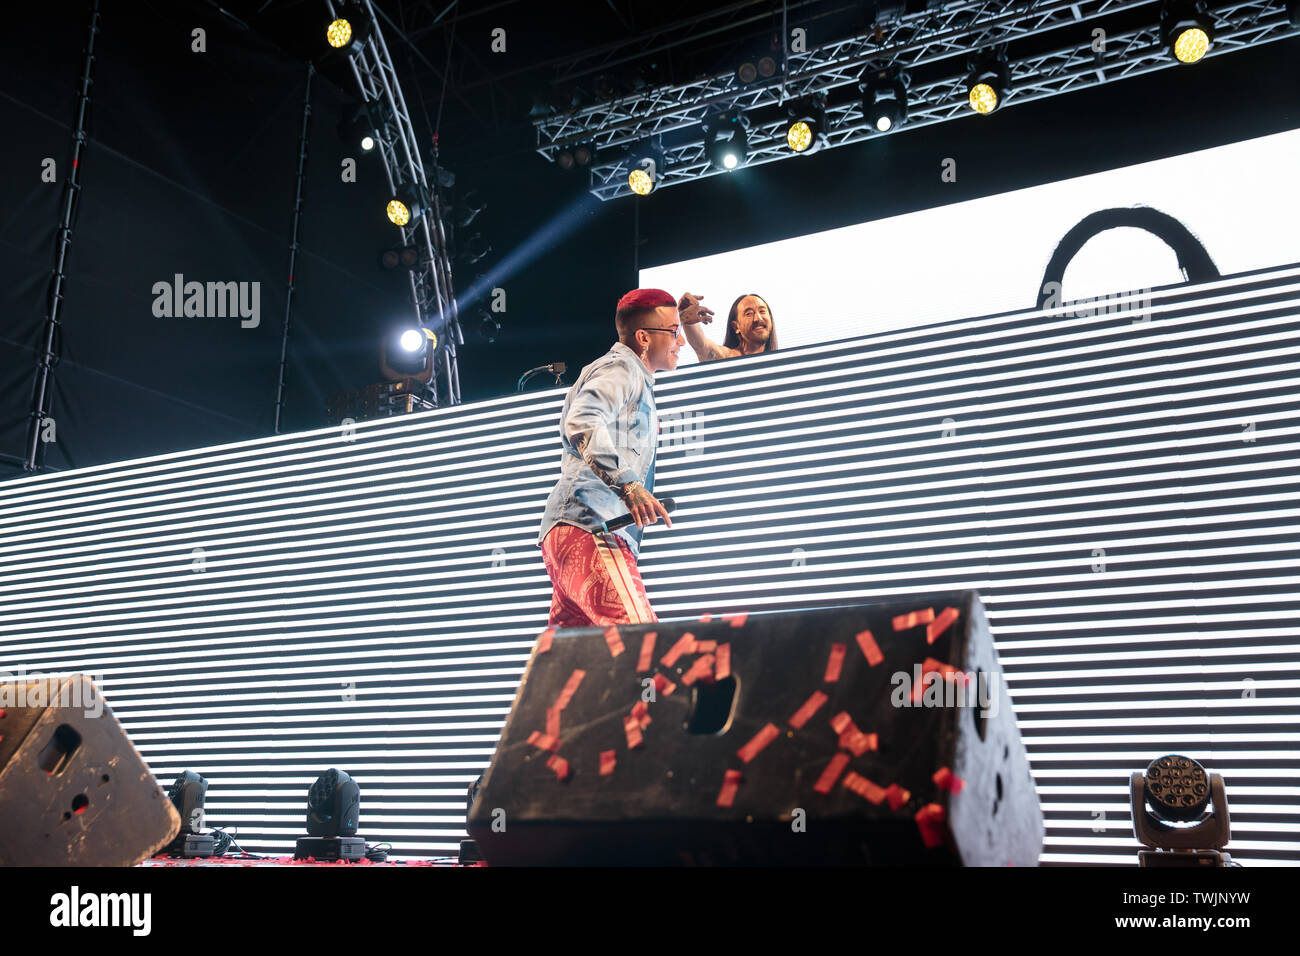 steve aoki performs a djset during the gruvillage festival Stock Photo